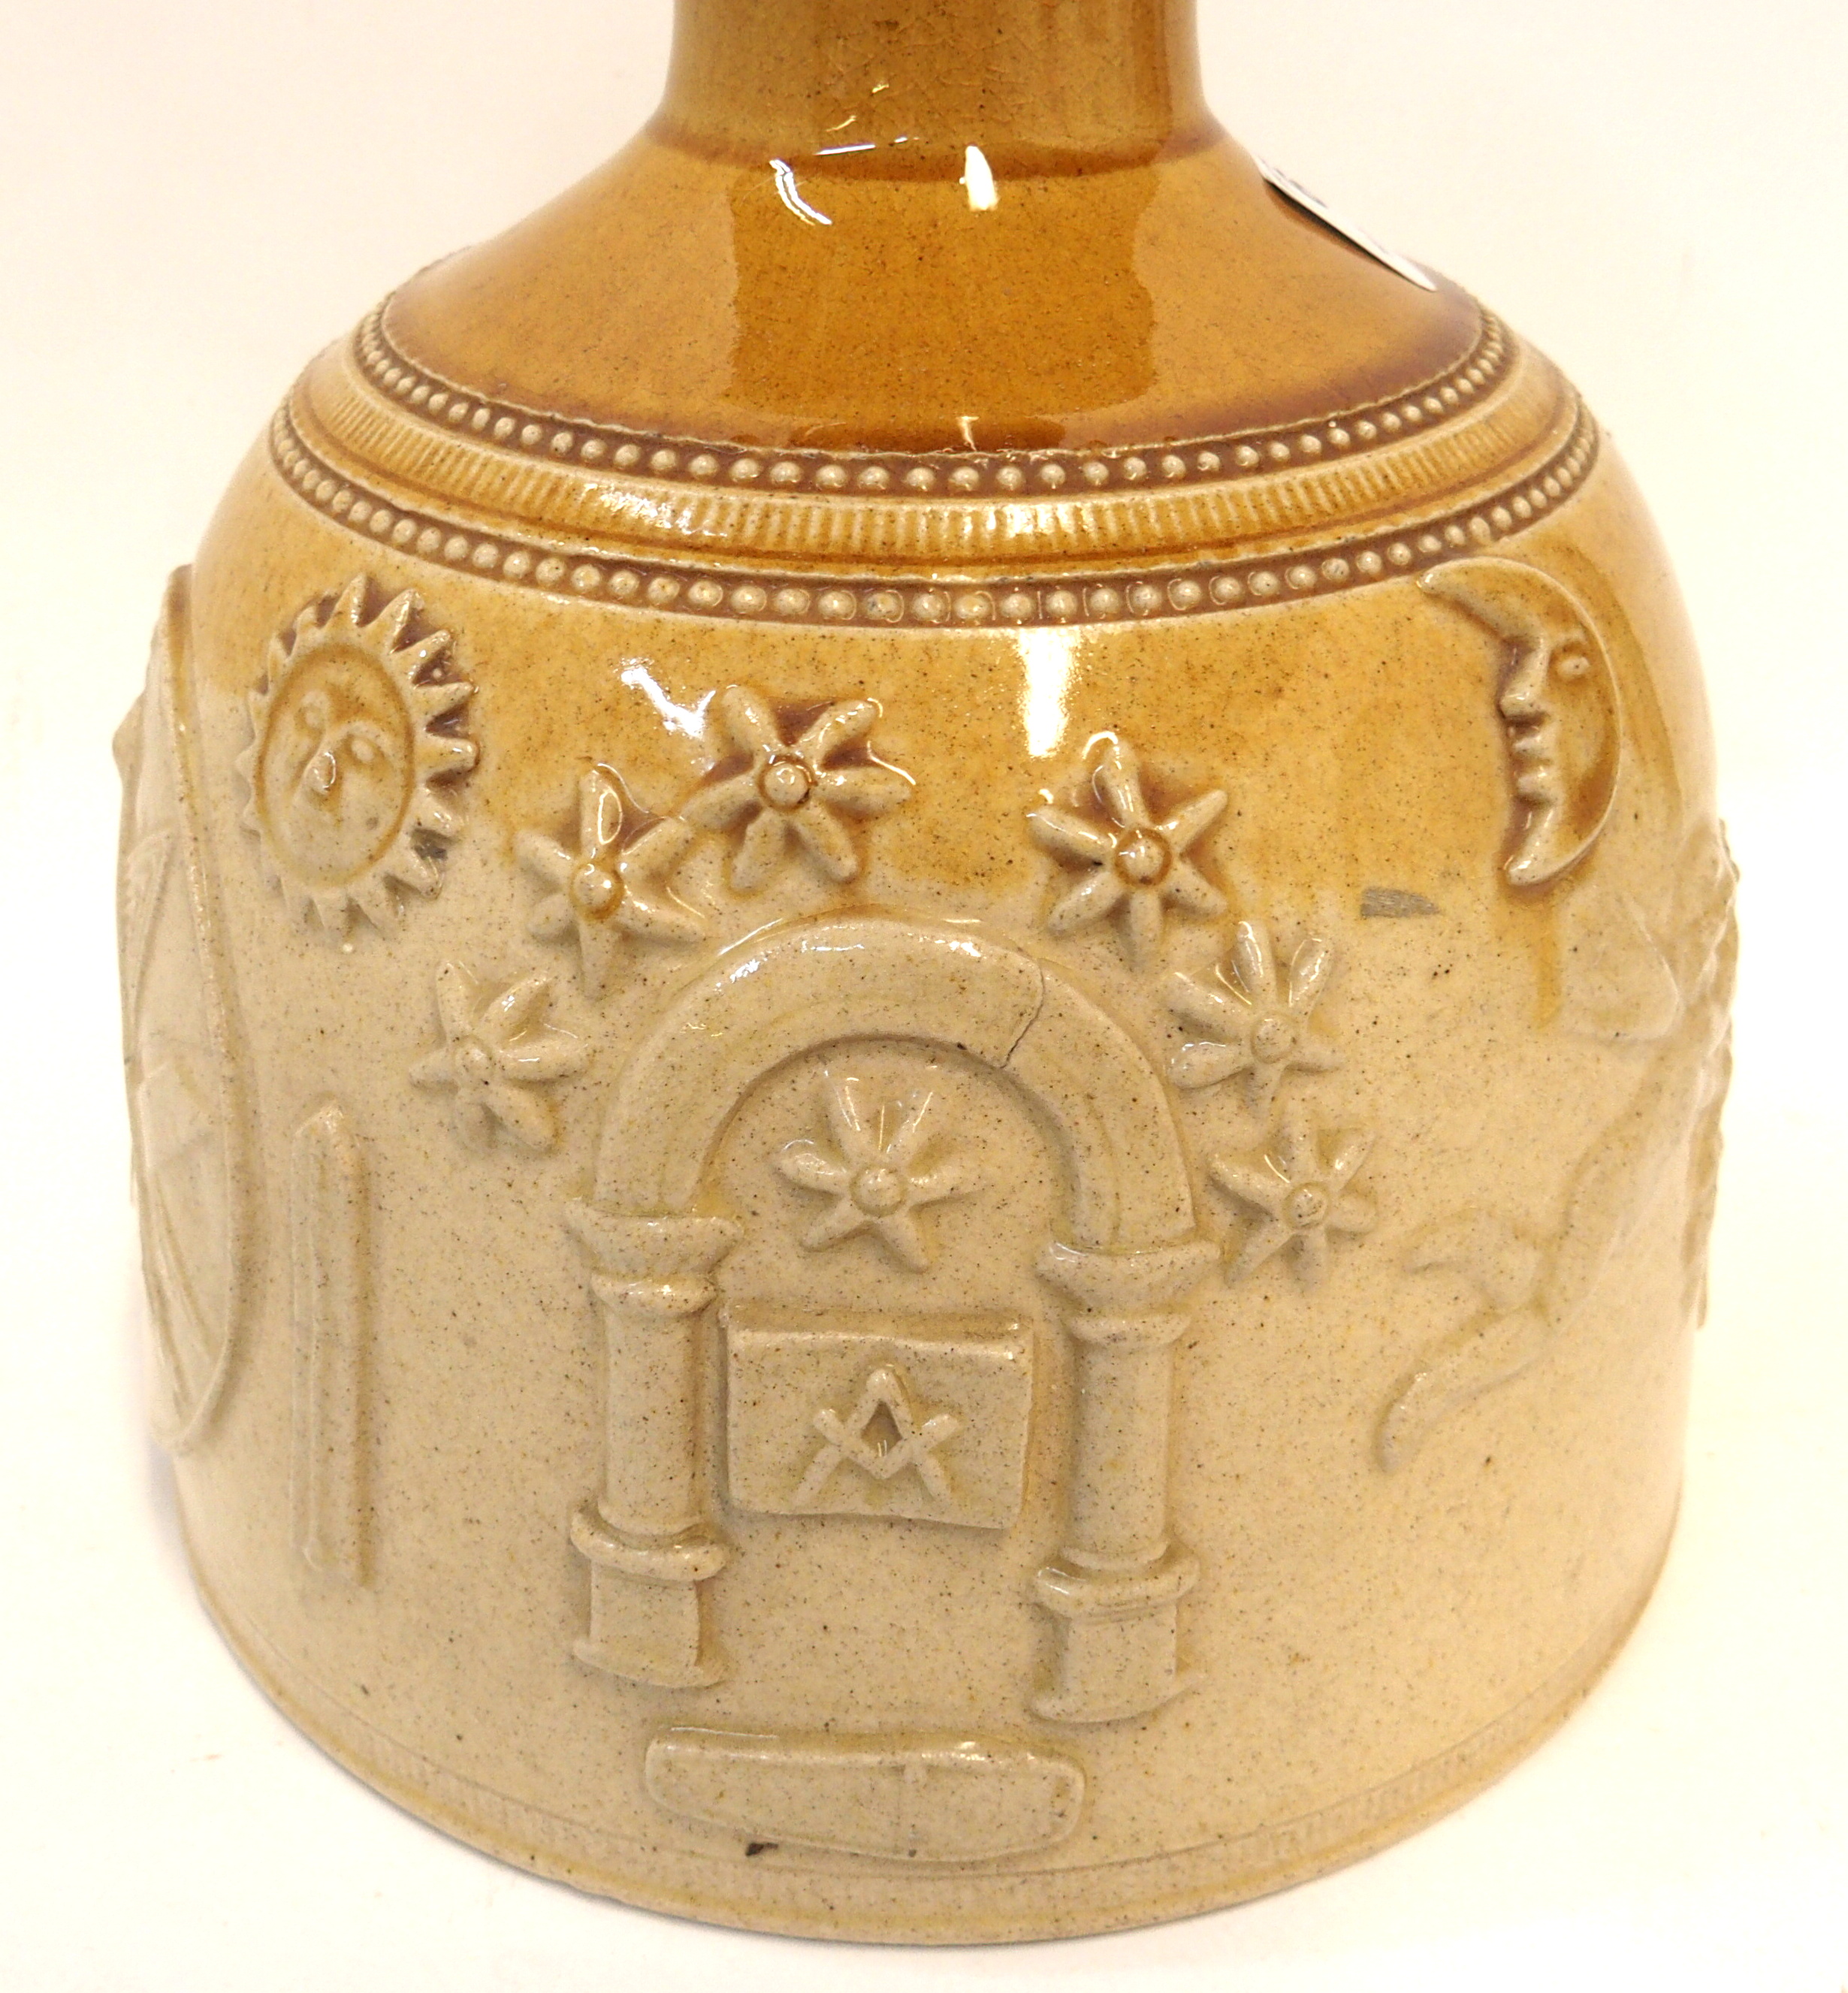 A Mason's Mallet whisky decanter in brown and tan glaze with raised Masonic symbols with central - Image 4 of 6